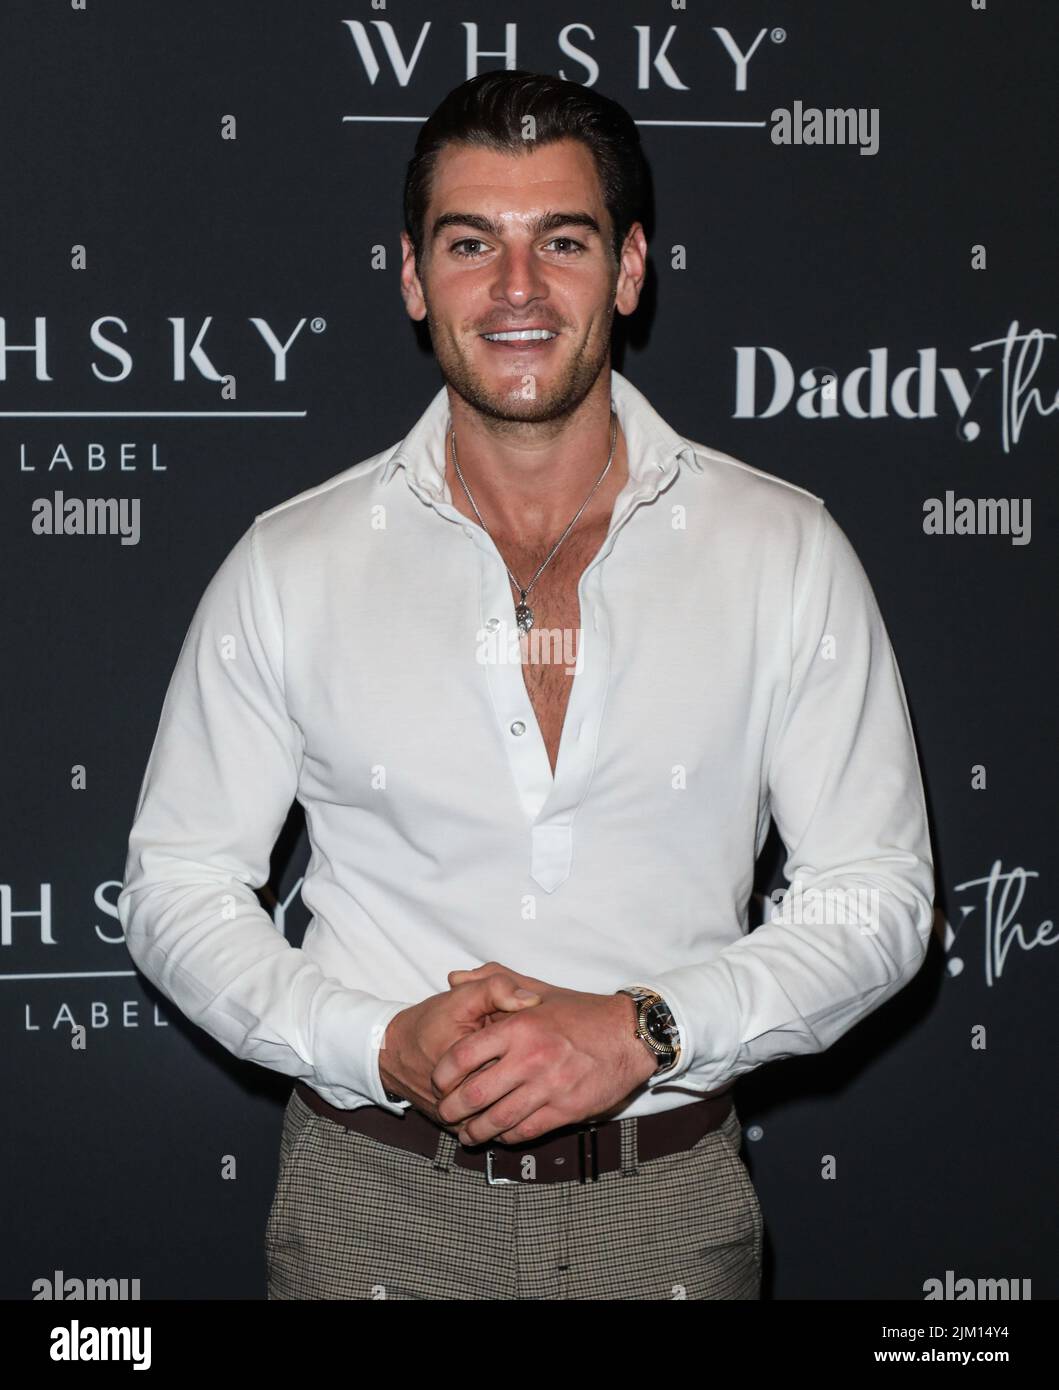 Matt Lapinskas seen attending the WHSKY Label launch party at Aures in London Stock Photo